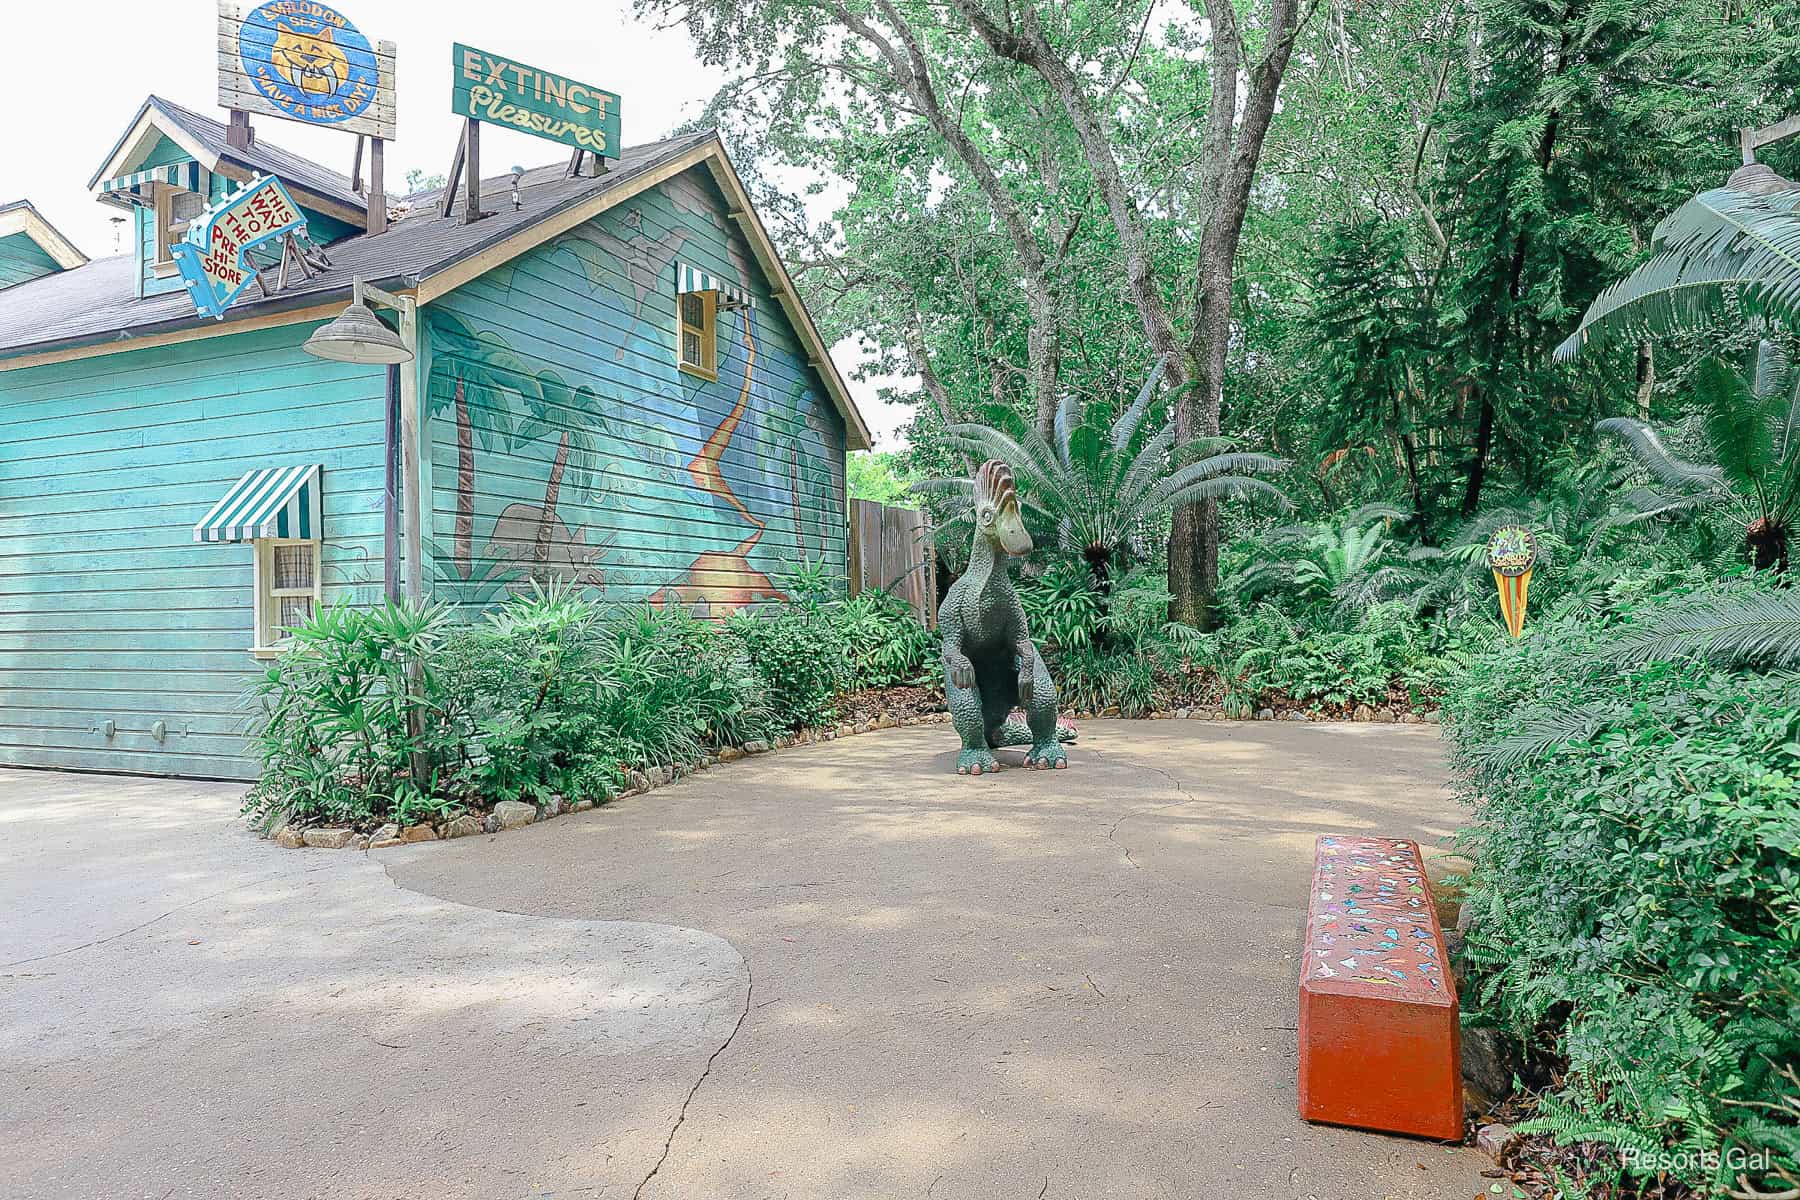 the meet-and-greet location for bird-watching Goofy before he arrives 